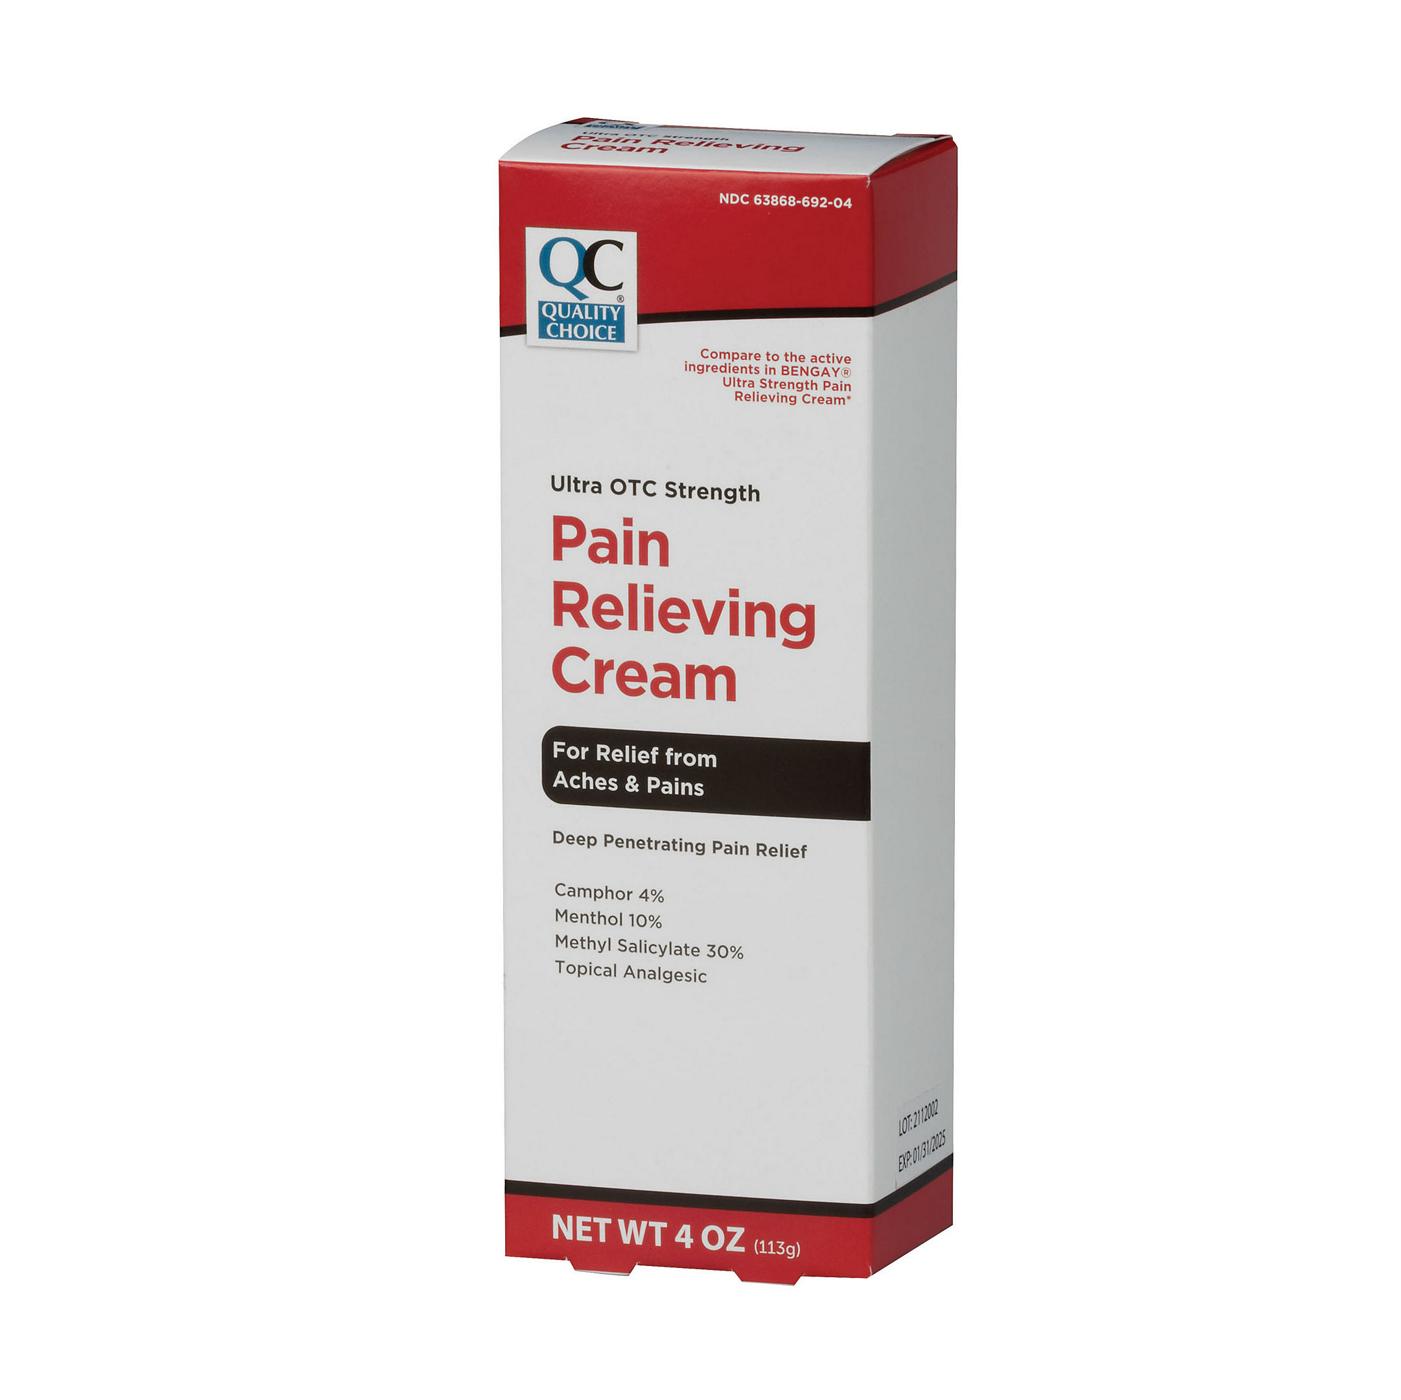 Quality Choice Ultra Strength Pain Relieving Cream; image 2 of 4